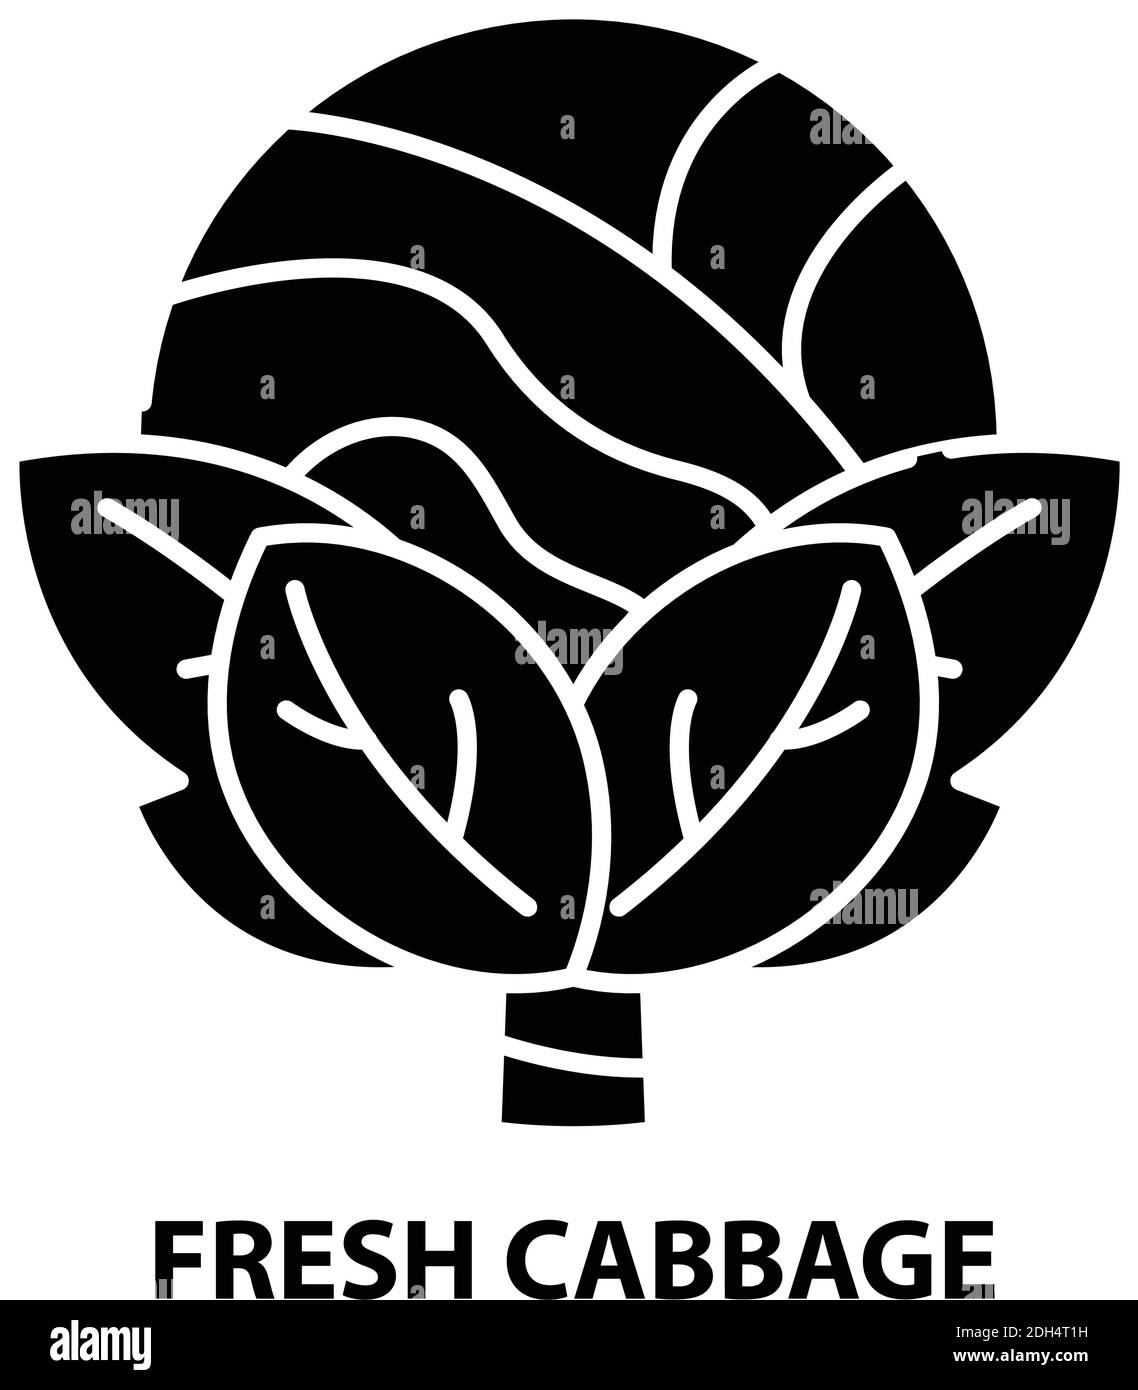 fresh cabbage icon, black vector sign with editable strokes, concept illustration Stock Vector